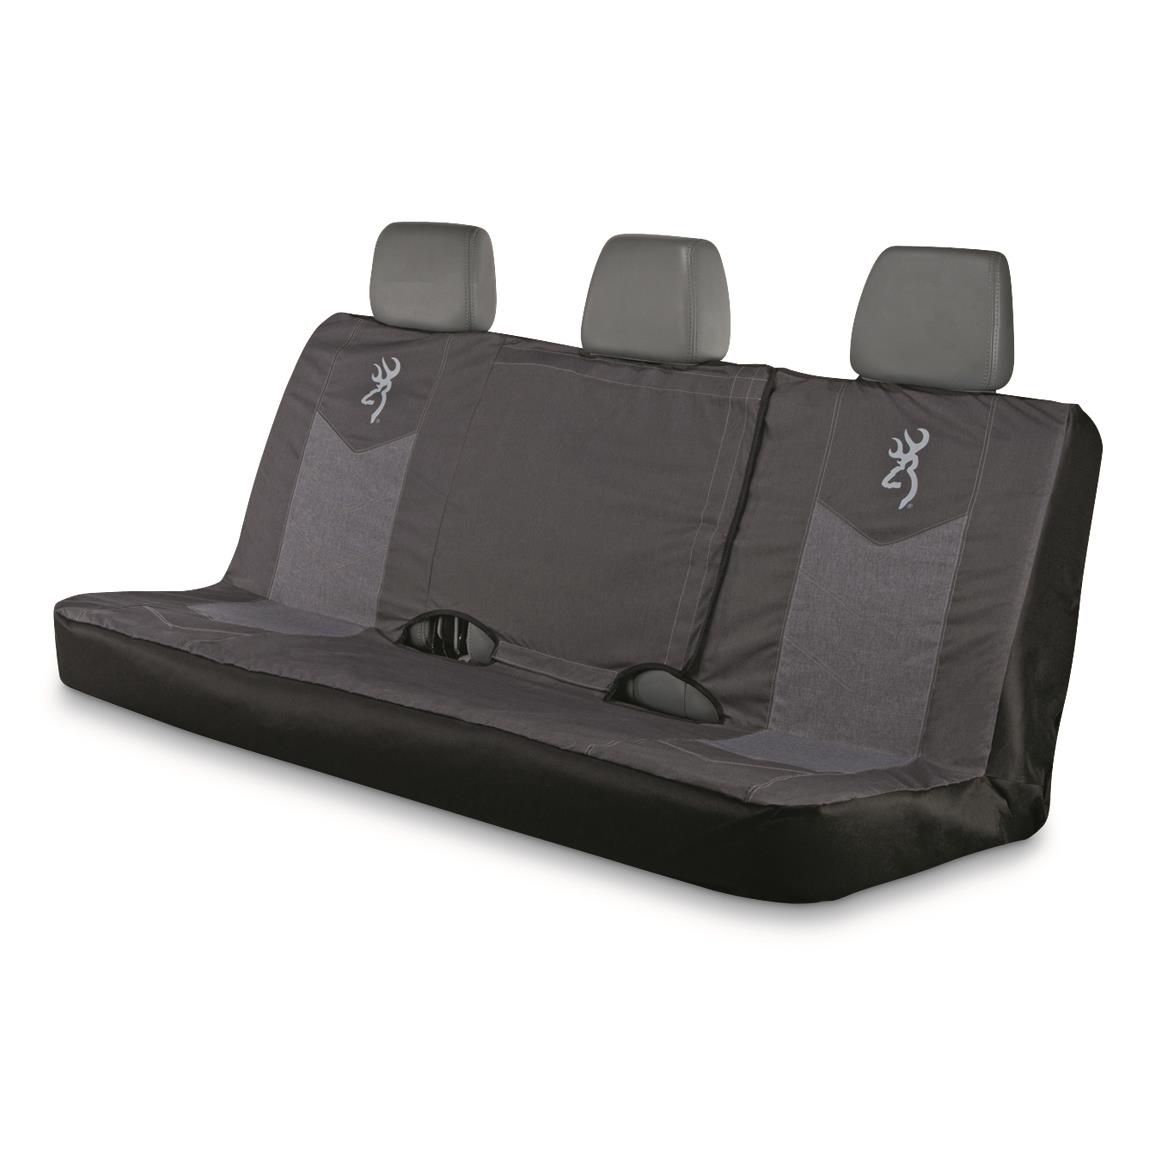 Browning Chevron Full Size Bench Seat Cover, Black/Gray